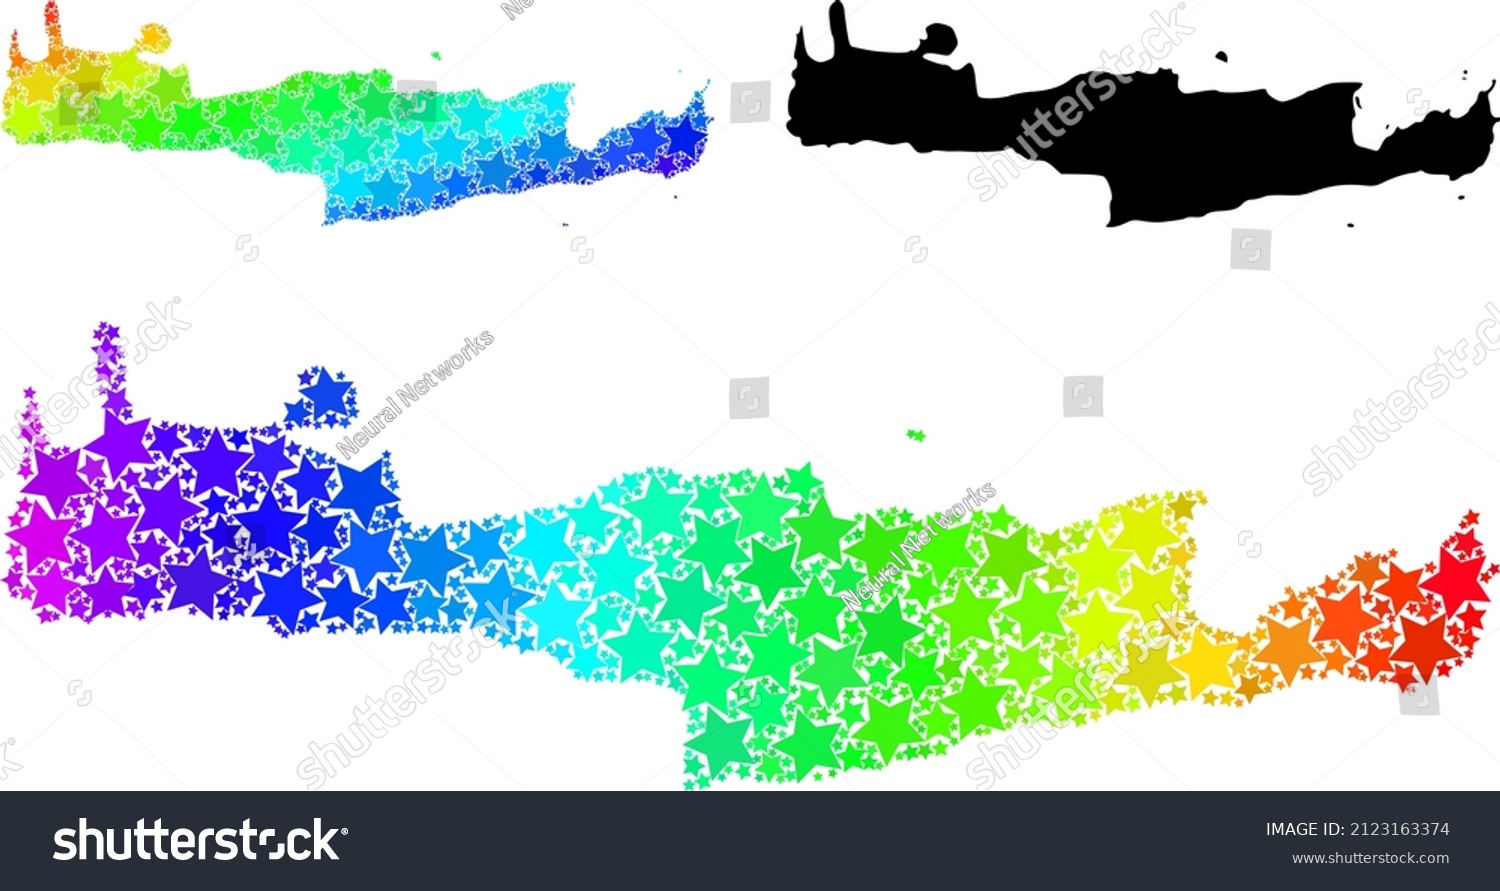 SVG of Rainbow gradiented stars mosaic map of Crete Island. Vector colored map of Crete Island with rainbow gradients. Mosaic map of Crete Island collage is organized from random colored star elements. svg